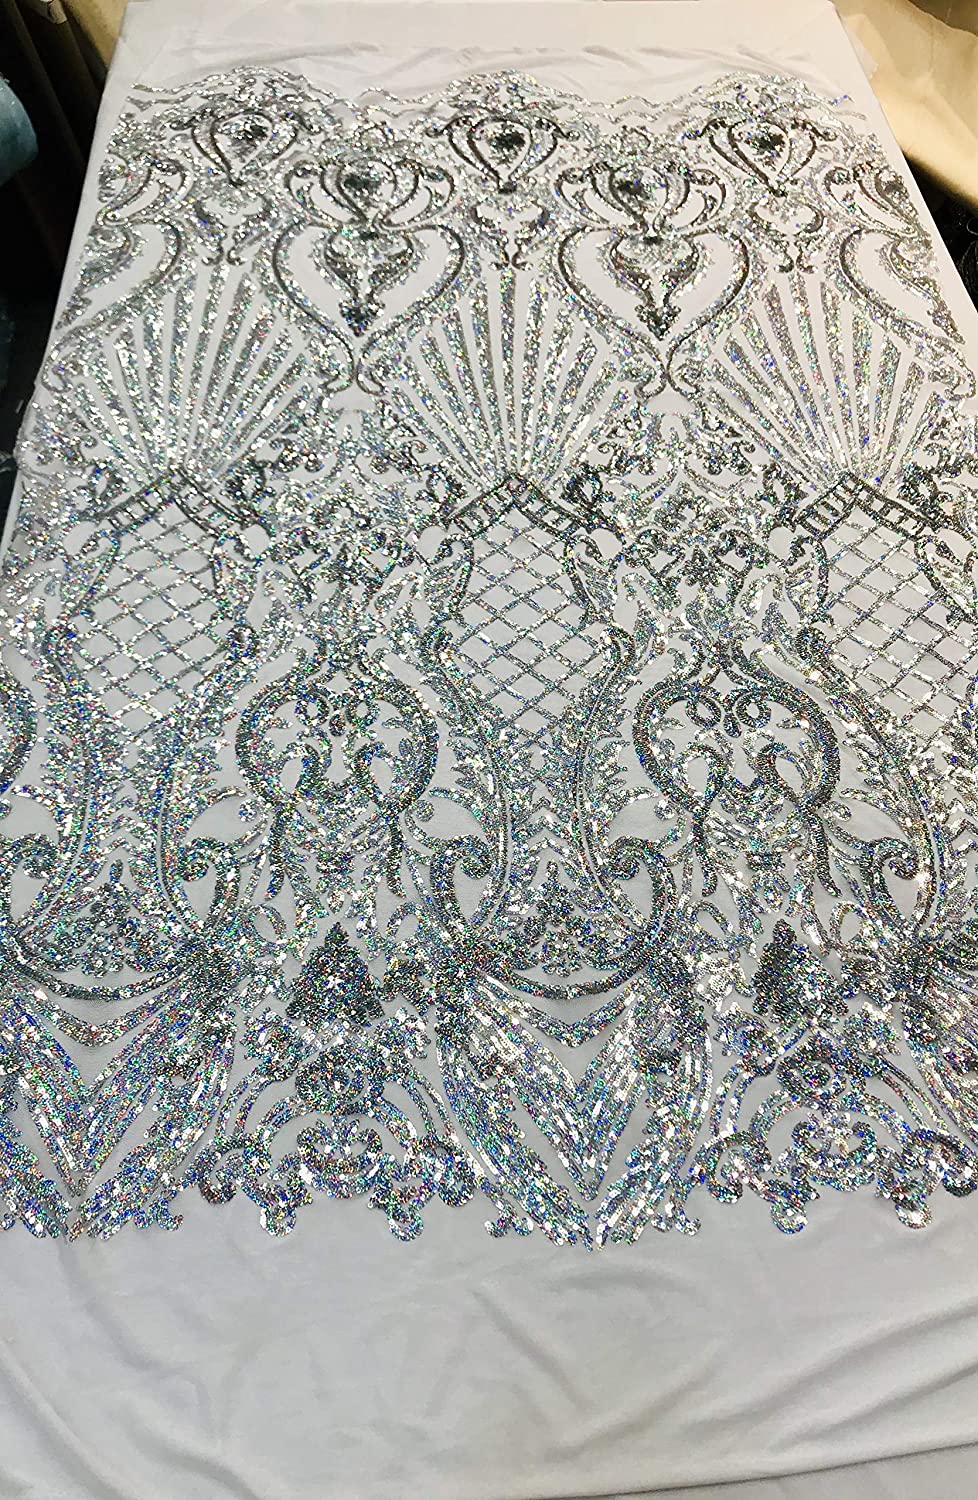 Damask Sequins Design on a 4 Way Stretch Mesh Fabric - for Night Gowns - Prom Dresses - (Silver Iridescent on White, 1 Yard)